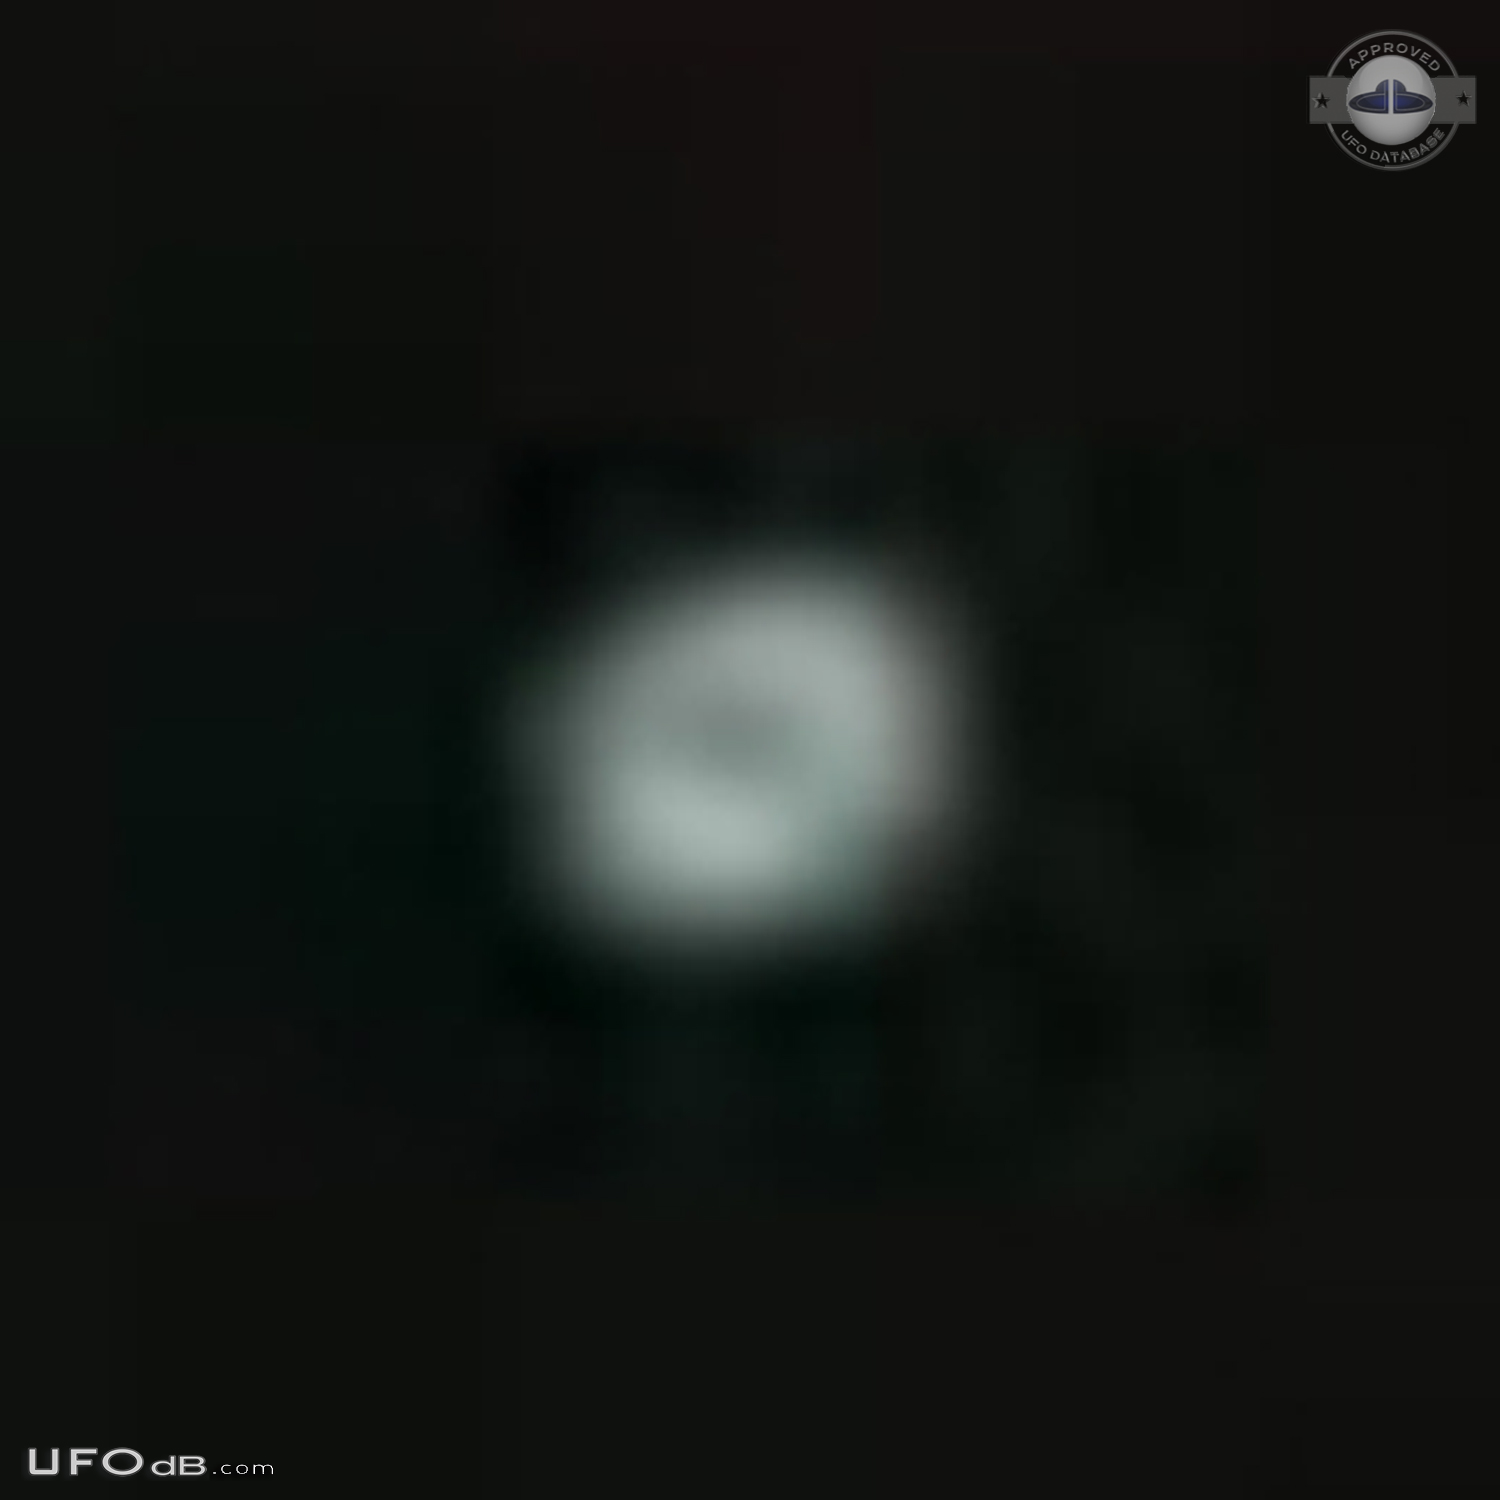 UFO hovered in the sky 30 min above my house - Aberdeen Scotland 2015 UFO Picture #660-5